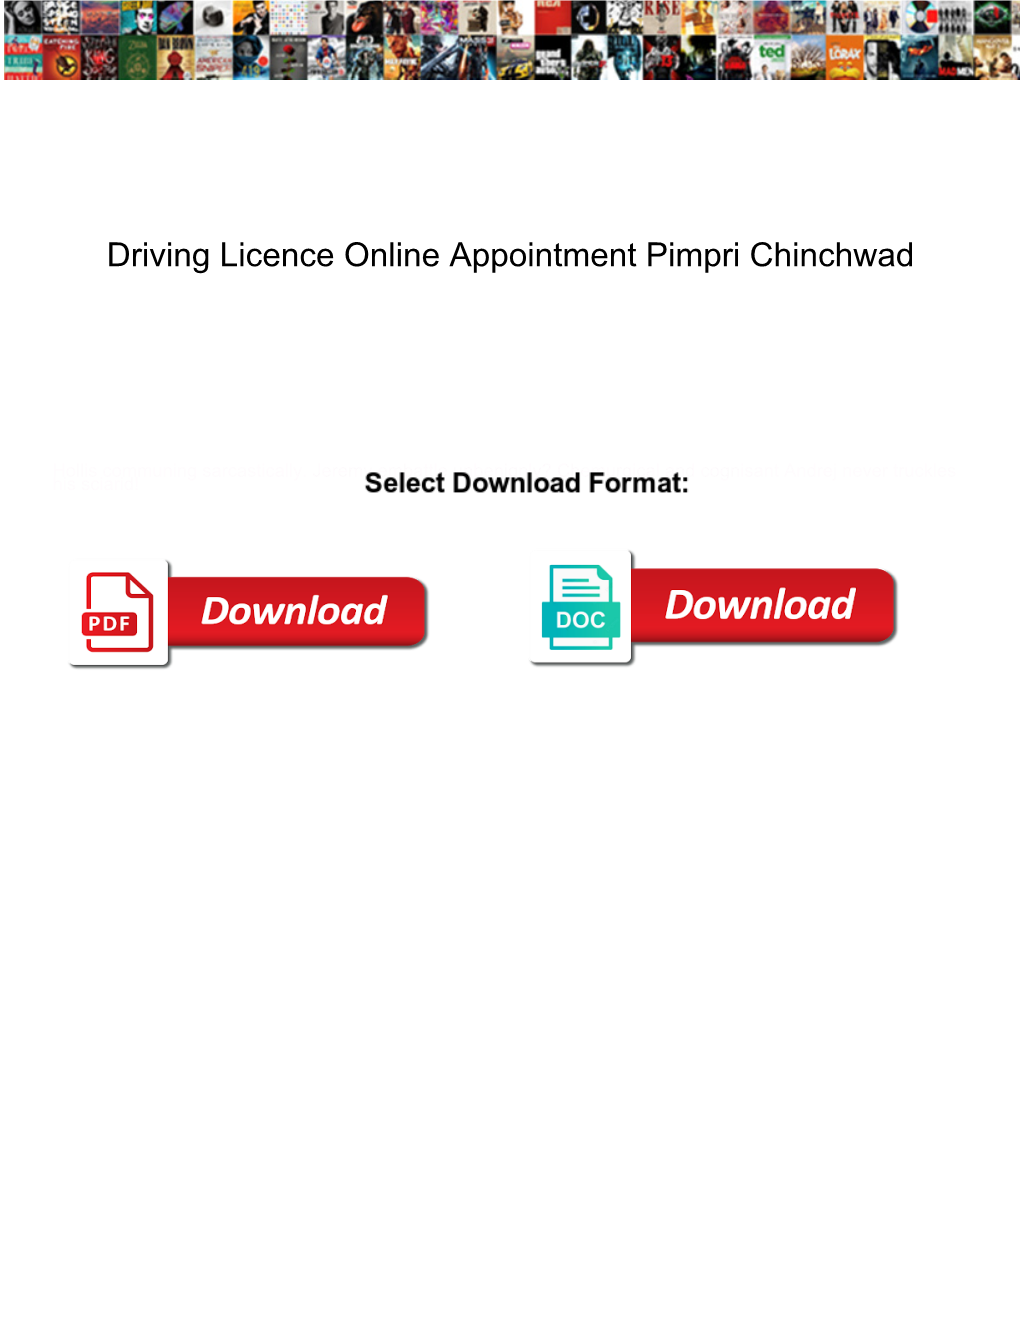 Driving Licence Online Appointment Pimpri Chinchwad